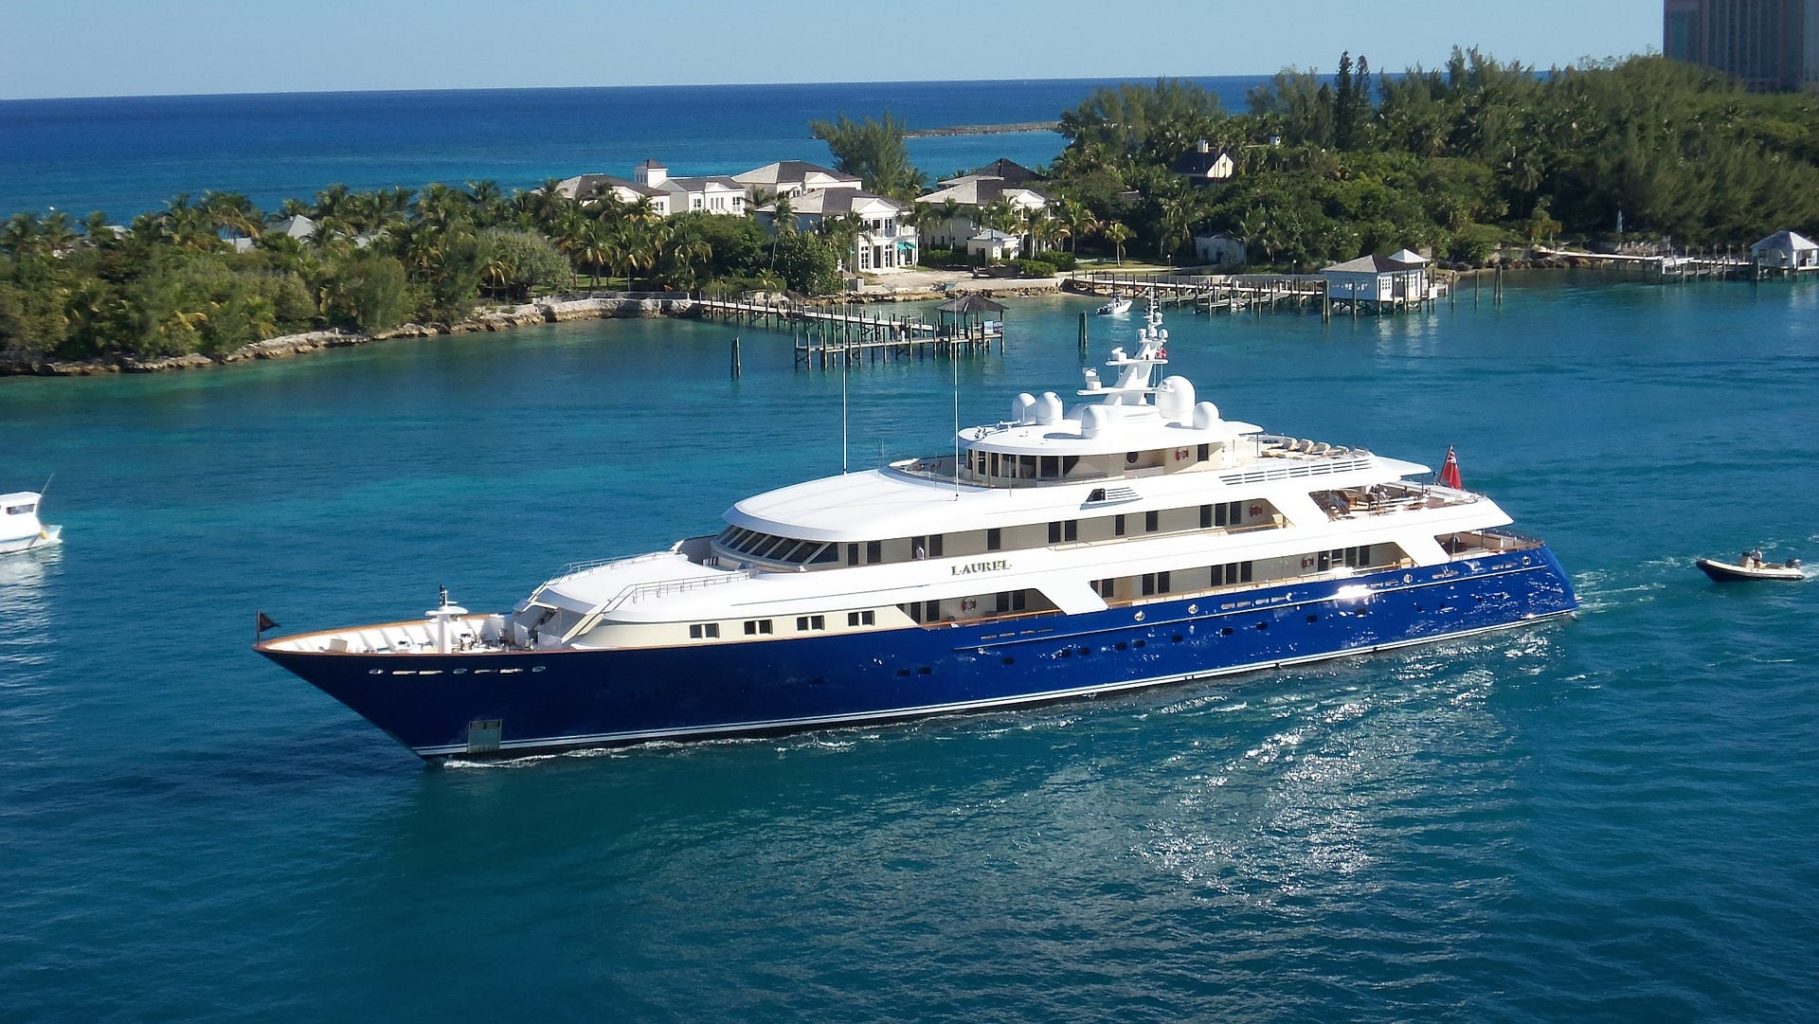 Laurel Yacht travelling through blue water with a blue sky